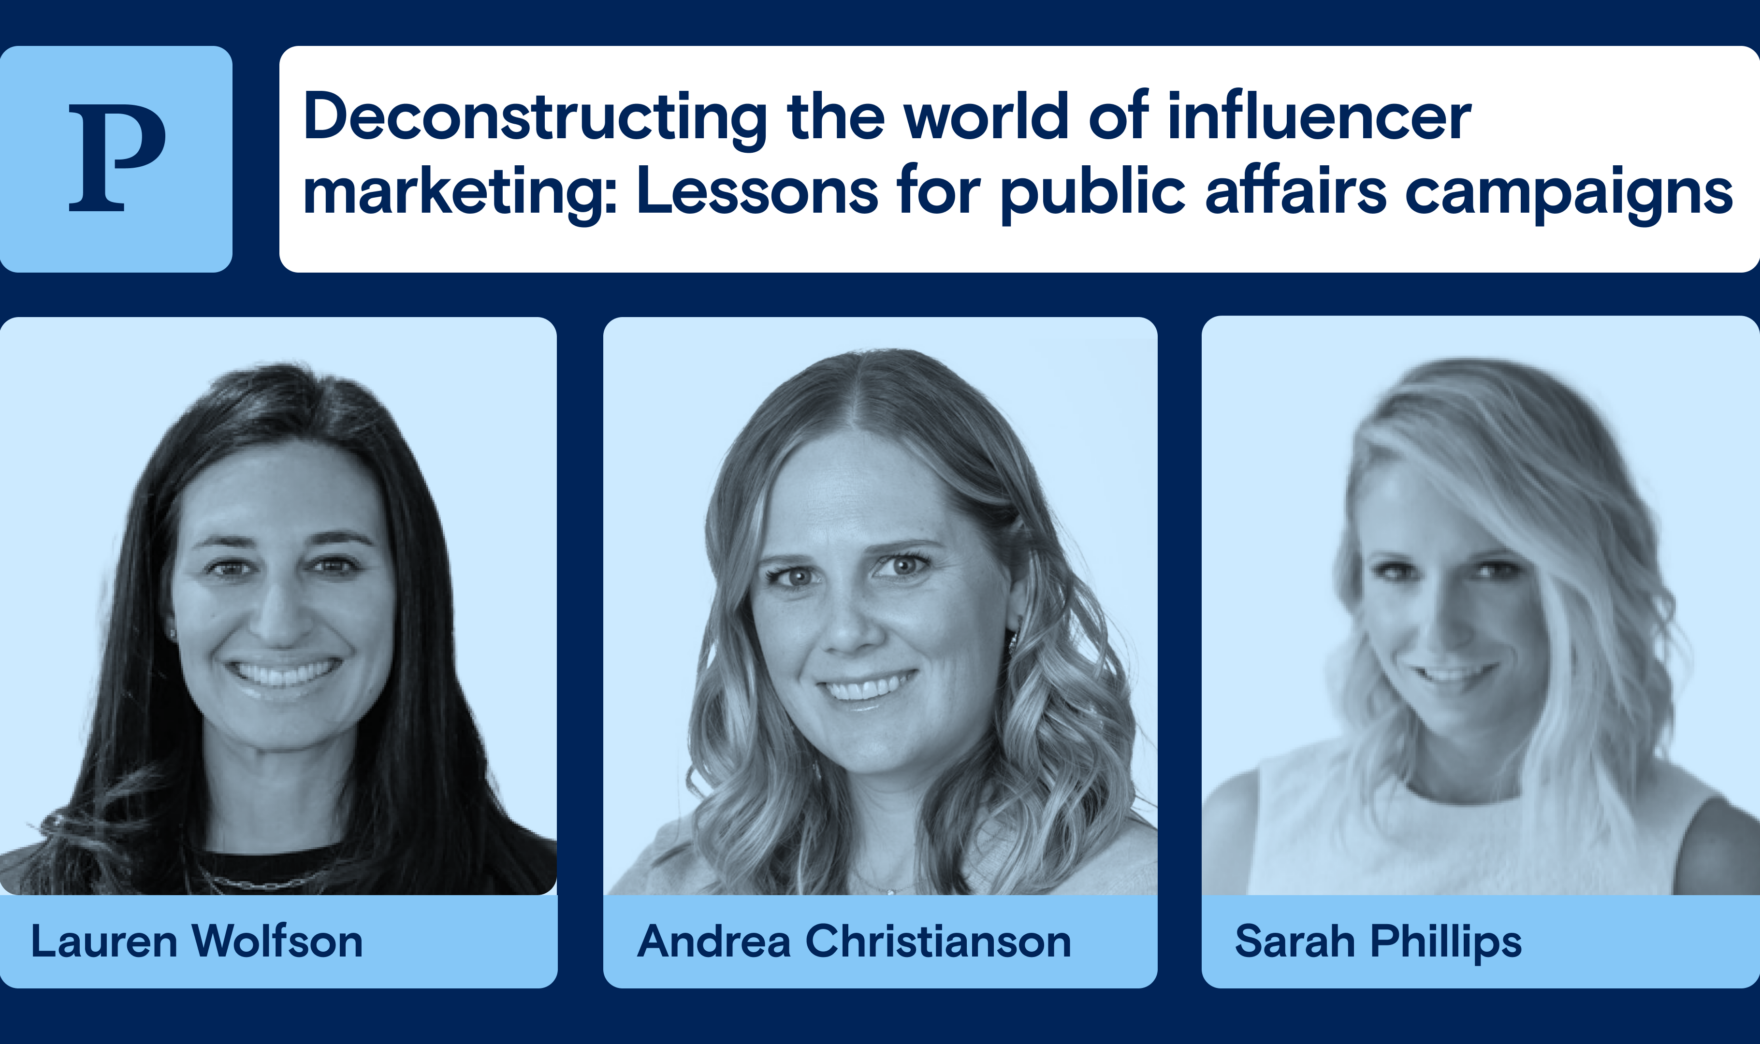 Deconstructing the world of influencer marketing: Lessons for public affairs campaigns